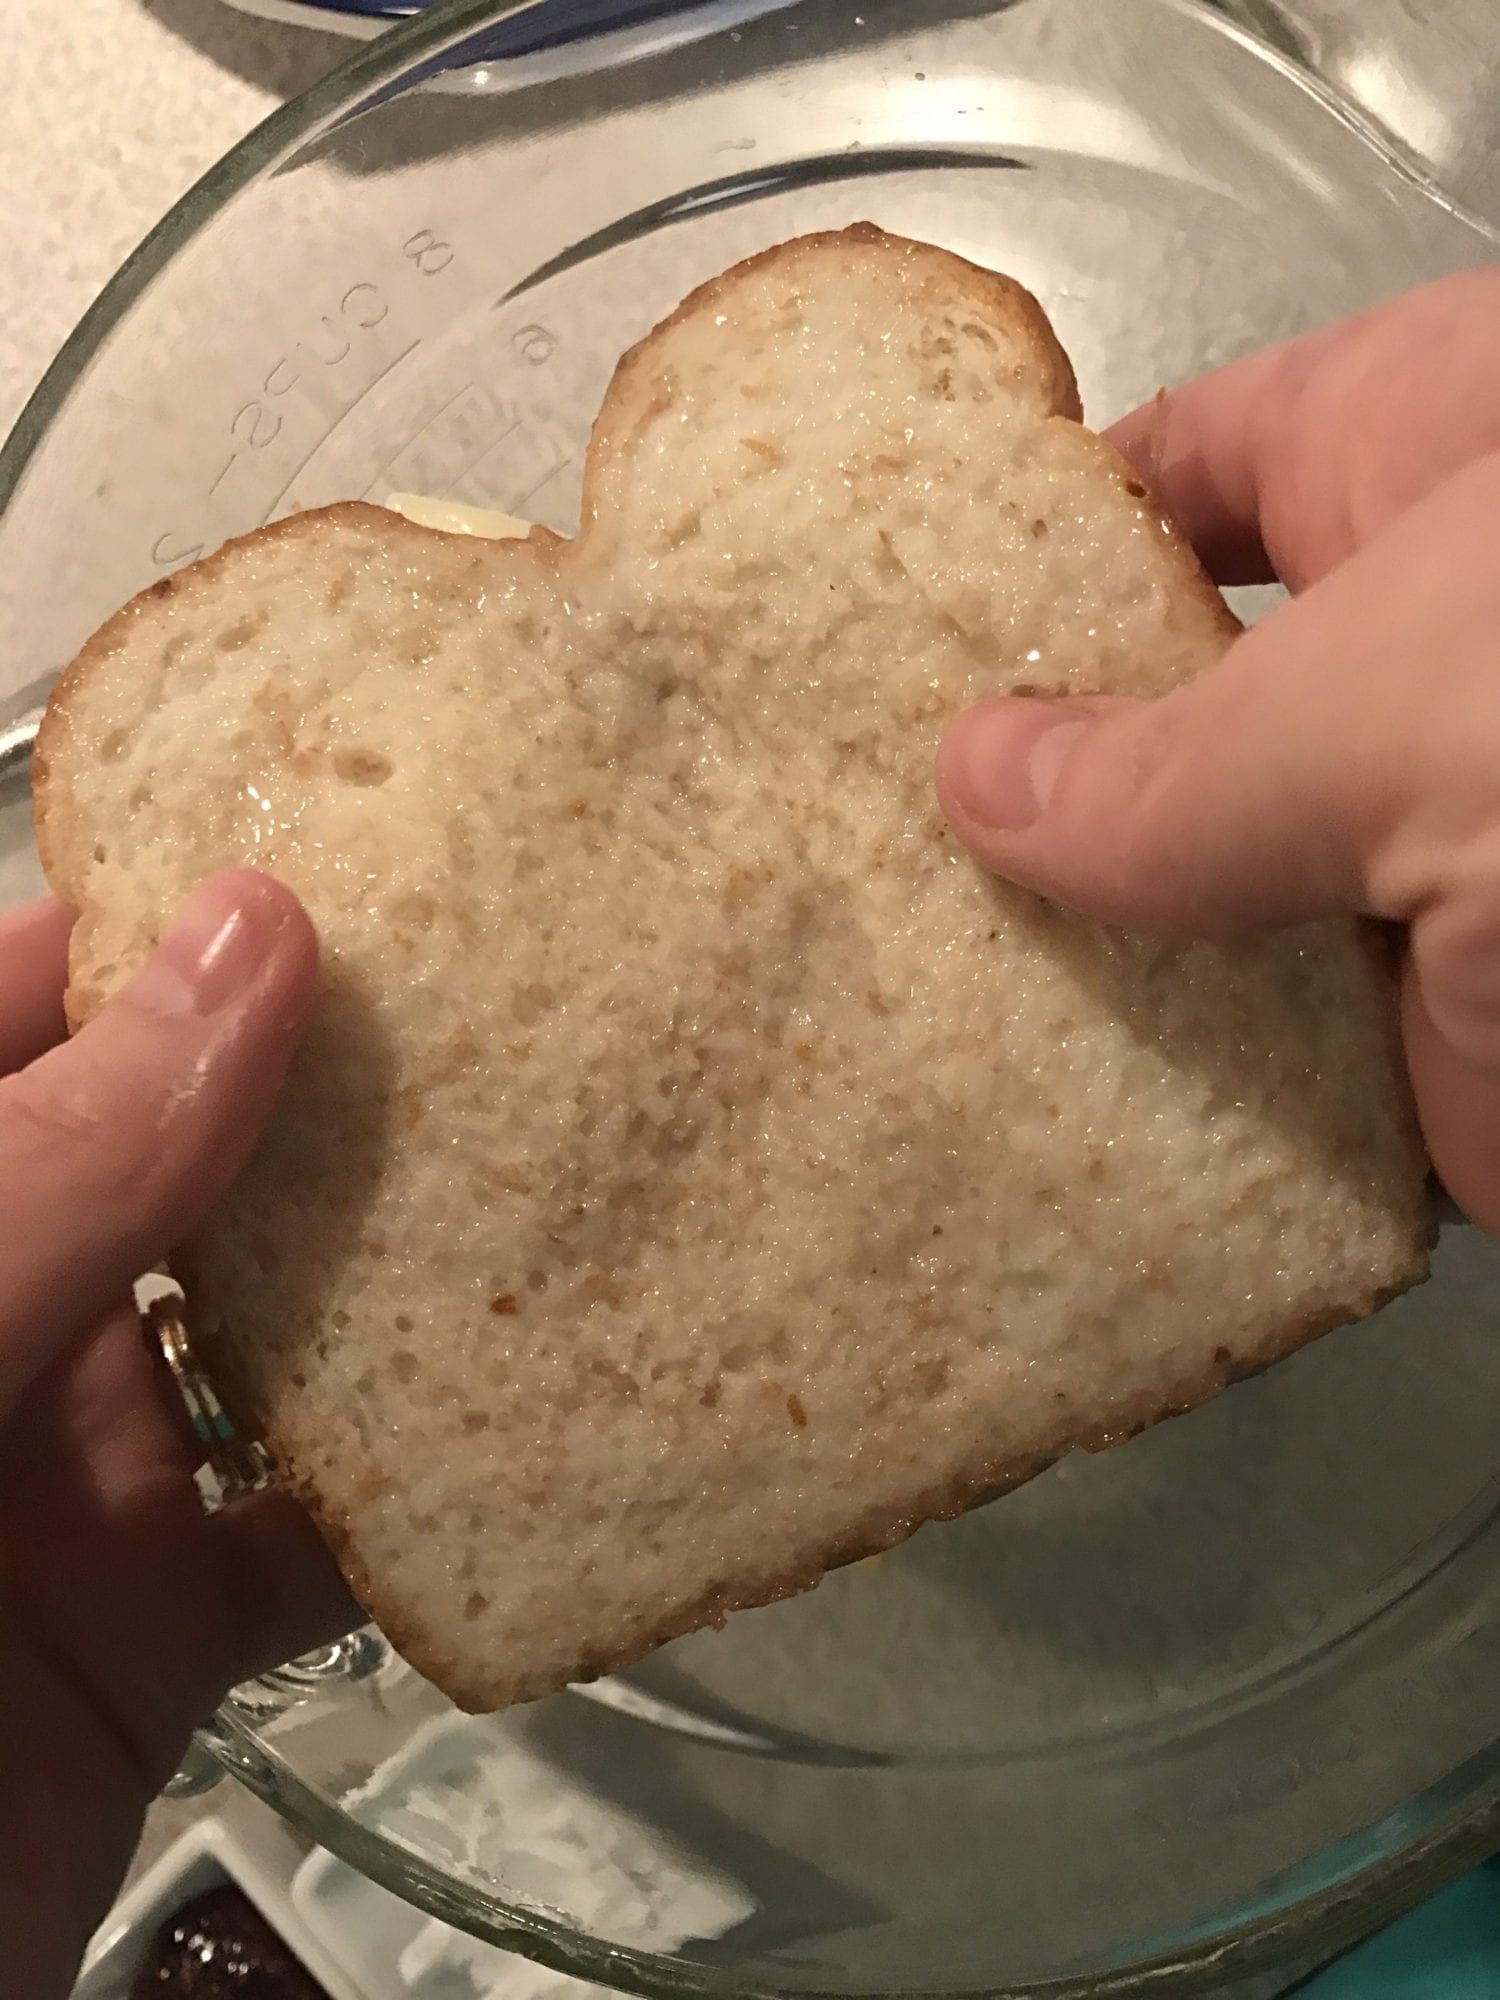 dunk sandwich in egg white and milk